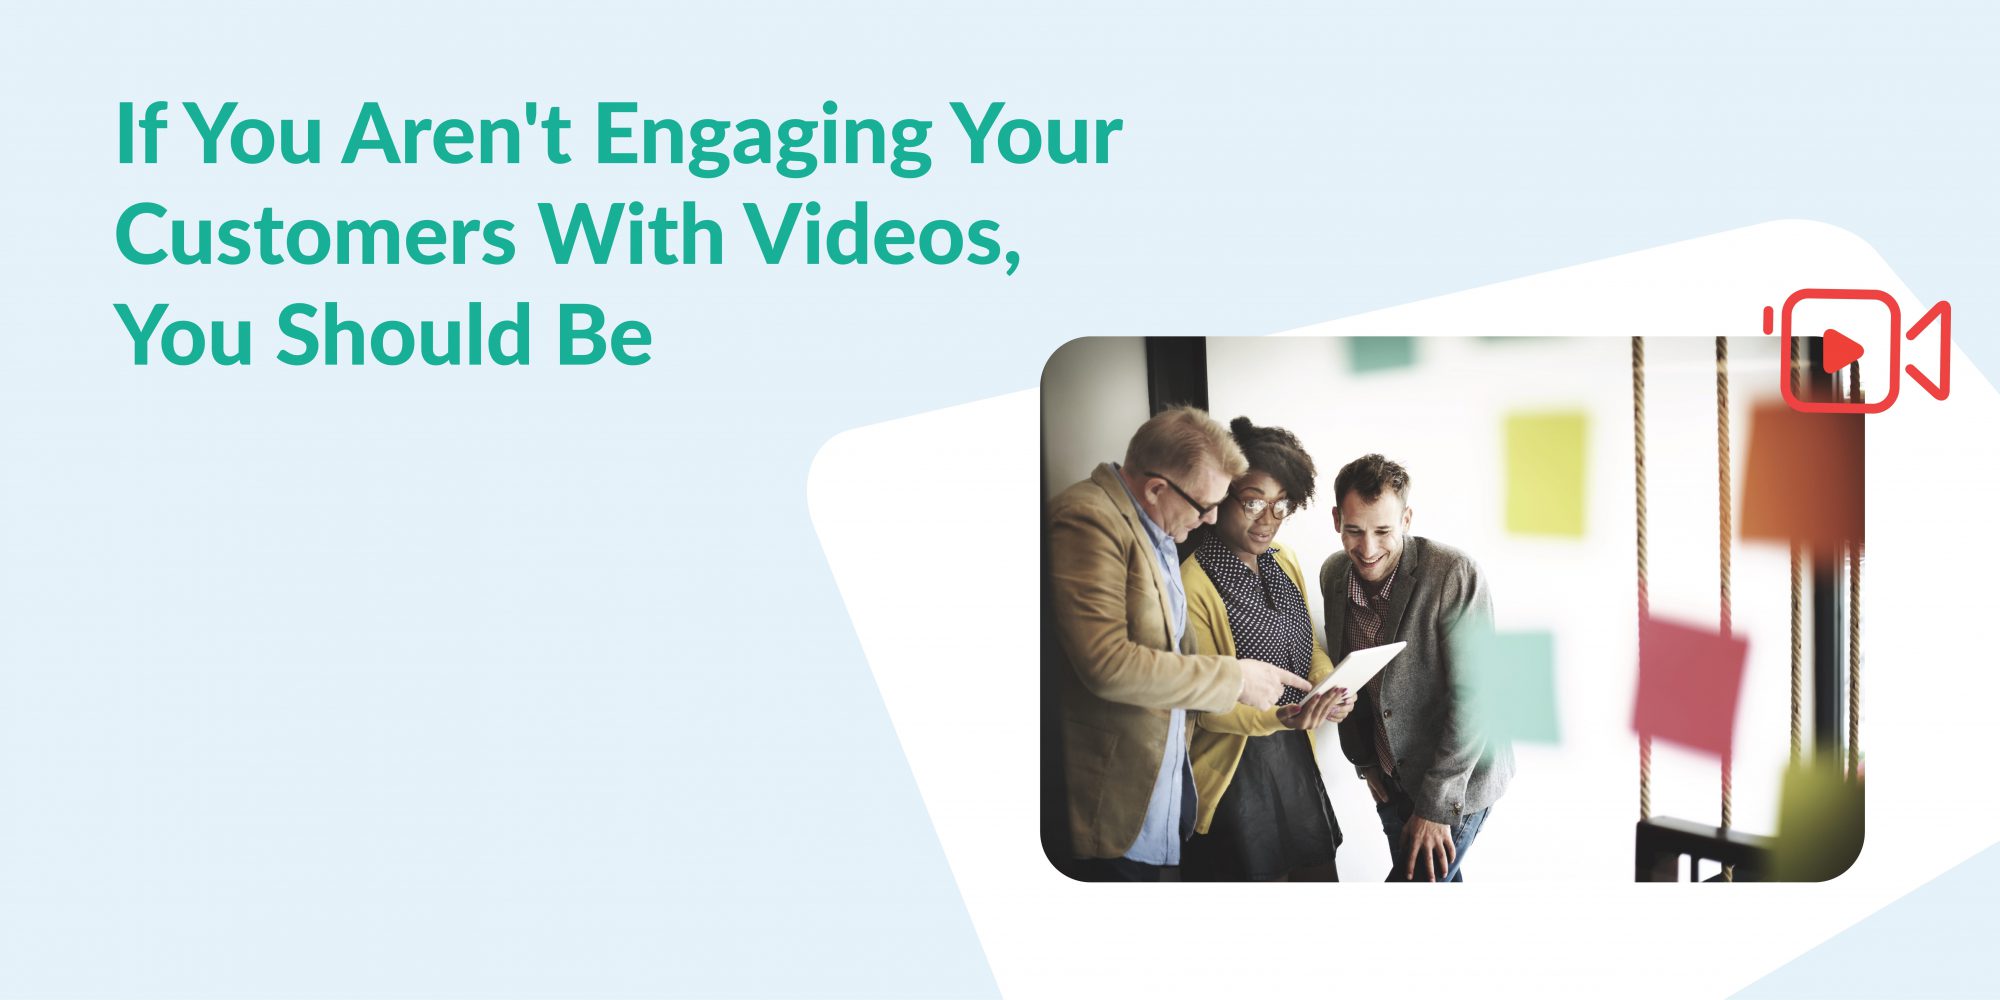 Engage customers with video